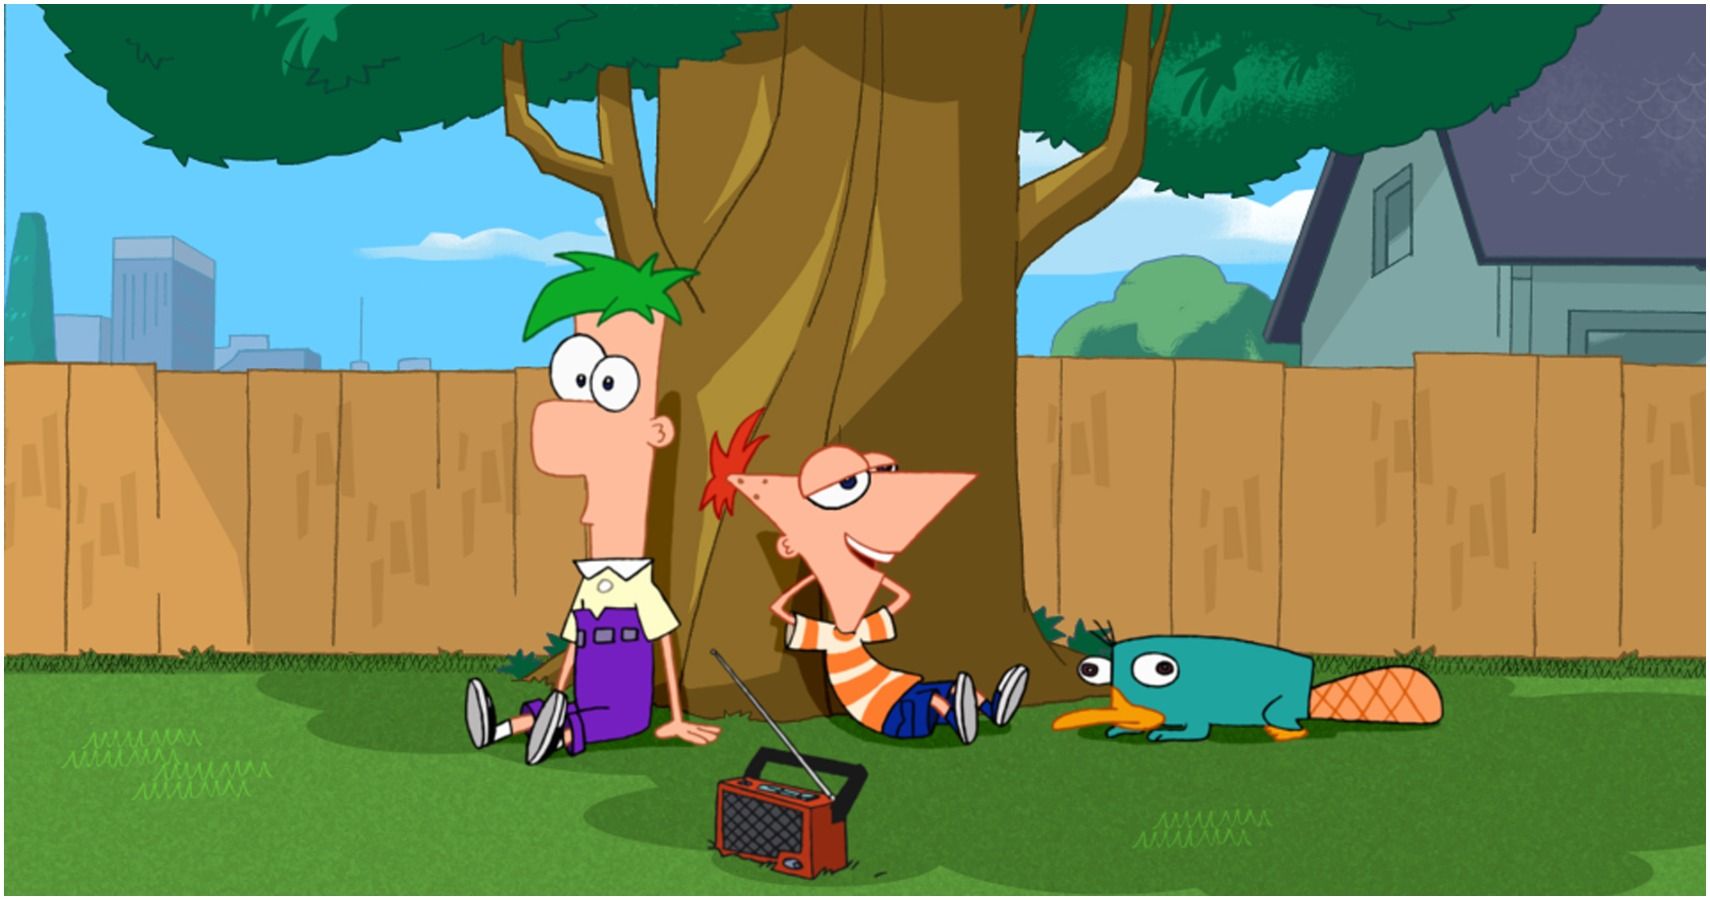 Things You Didn't Know About Phineas and Ferb